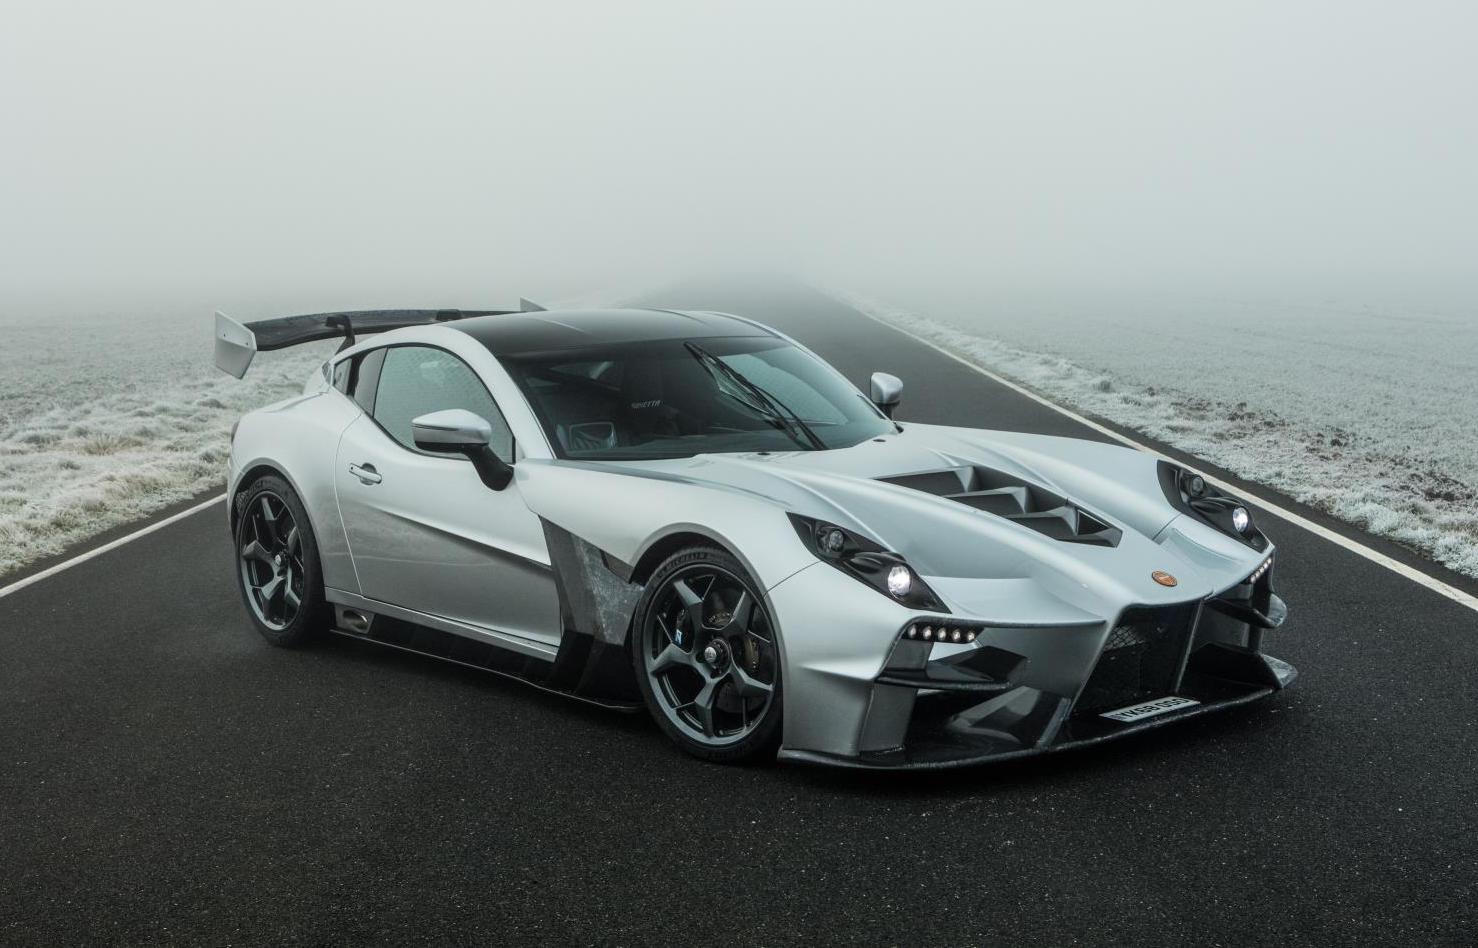 Ginetta supercar revealed as crazy road-legal race car